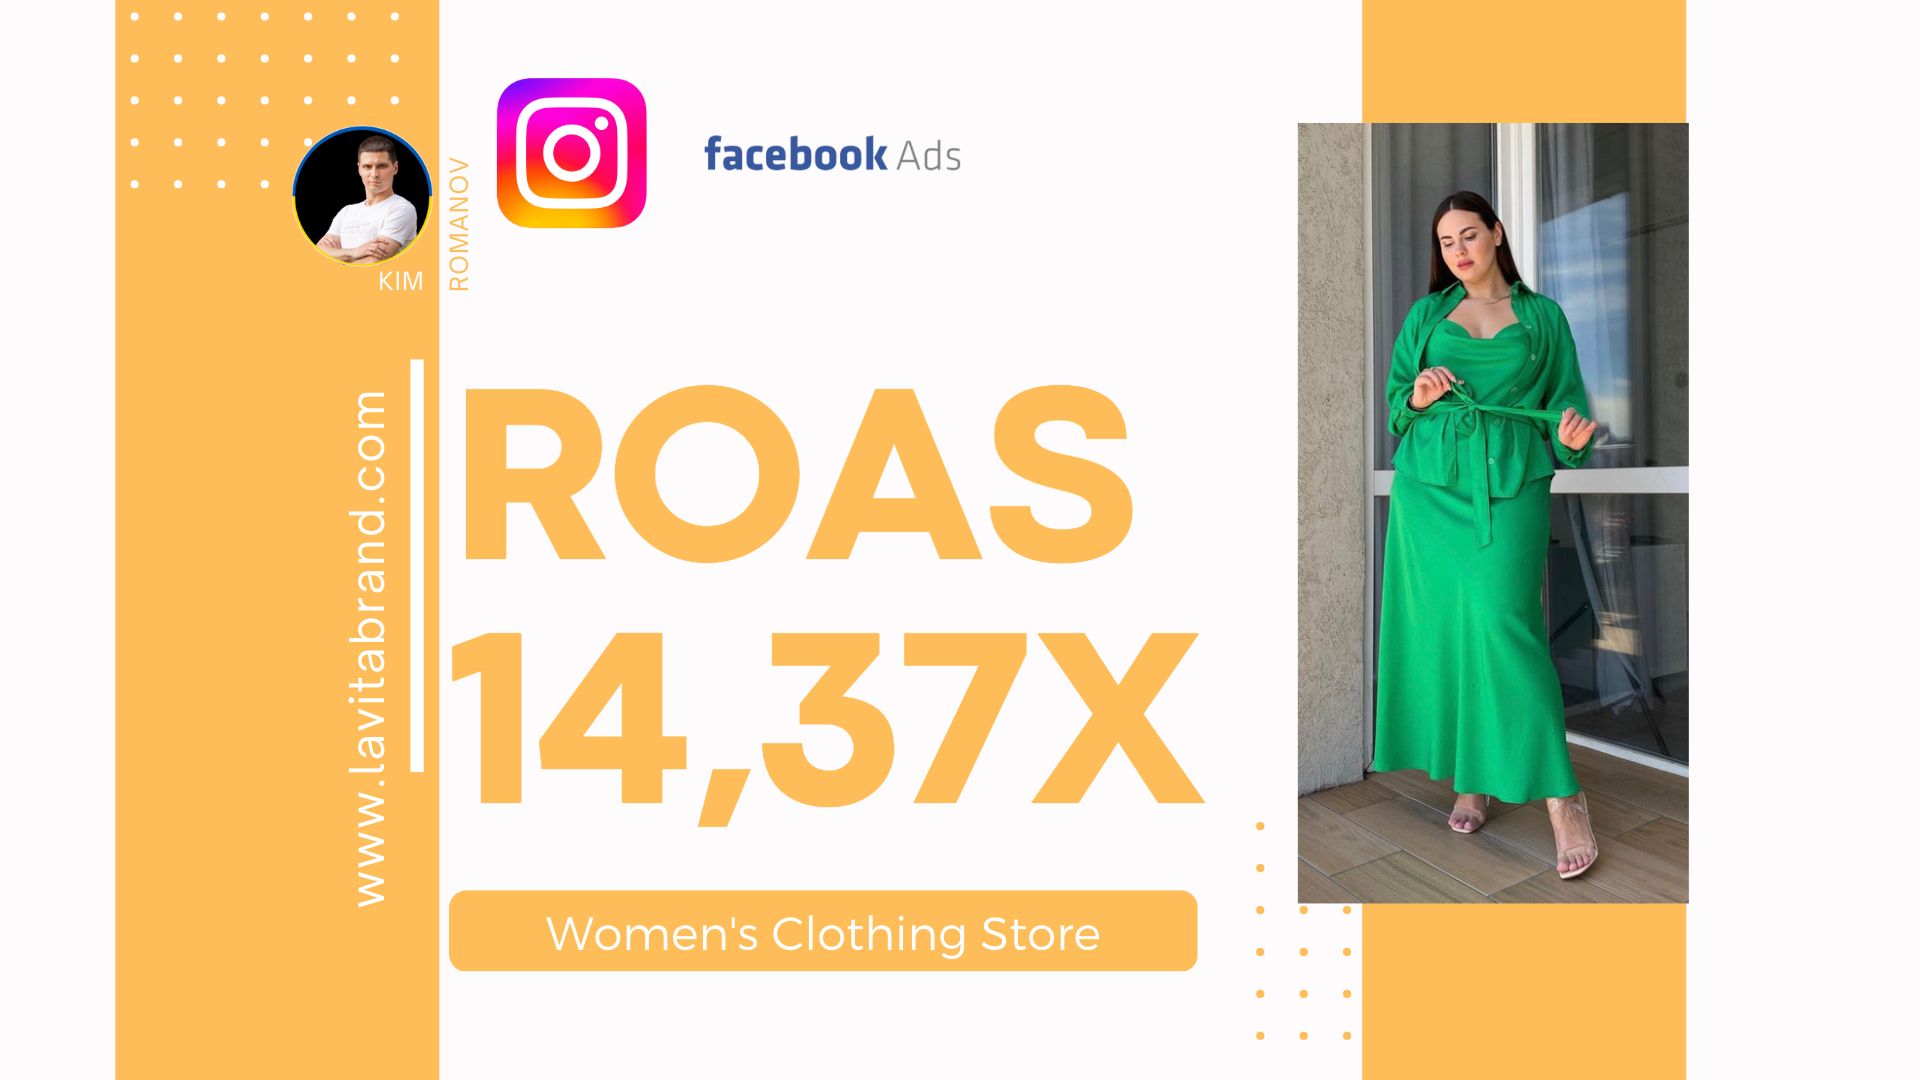 La Vita, a Ukrainian e-commerce company that offers XXL clothing for women, partnered with digital marketer Kim Romanov to launch Facebook and Instagram ads. By collaborating from May 2021 until October 2022, they achieved a 14.37x Return on Ad Spend (ROAS) by investing $5495 in ads and earning $78990. Read on to learn about their strategy, implementation, and results.